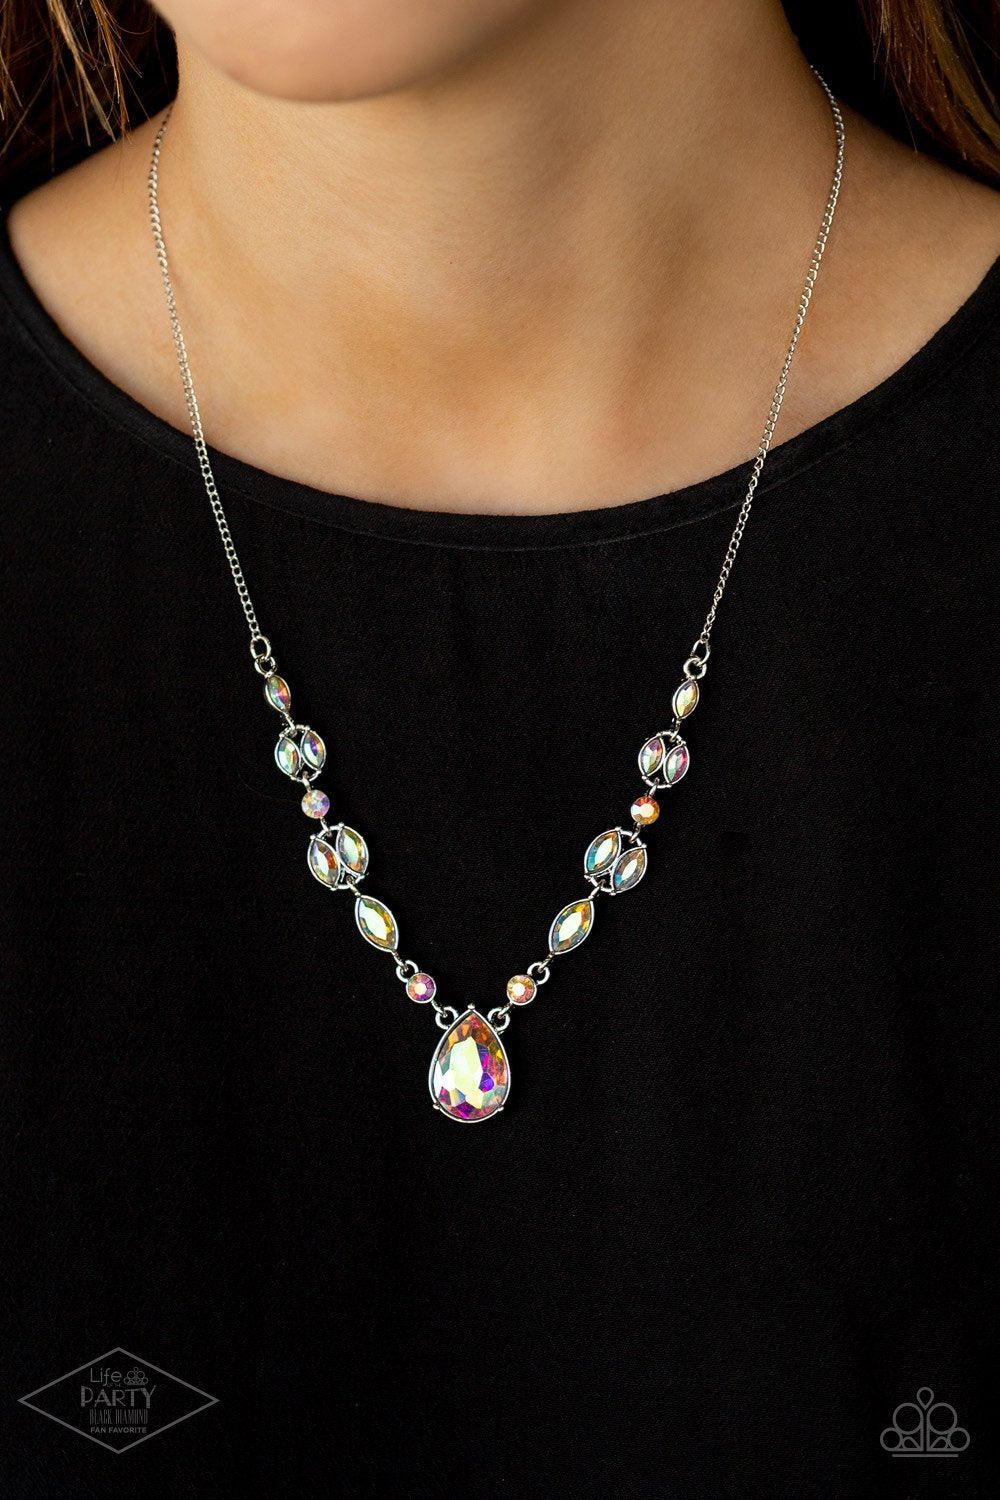 Royal Rendezvous Multi Iridescent Teardrop Rhinestone Necklace - Paparazzi Accessories- model - CarasShop.com - $5 Jewelry by Cara Jewels